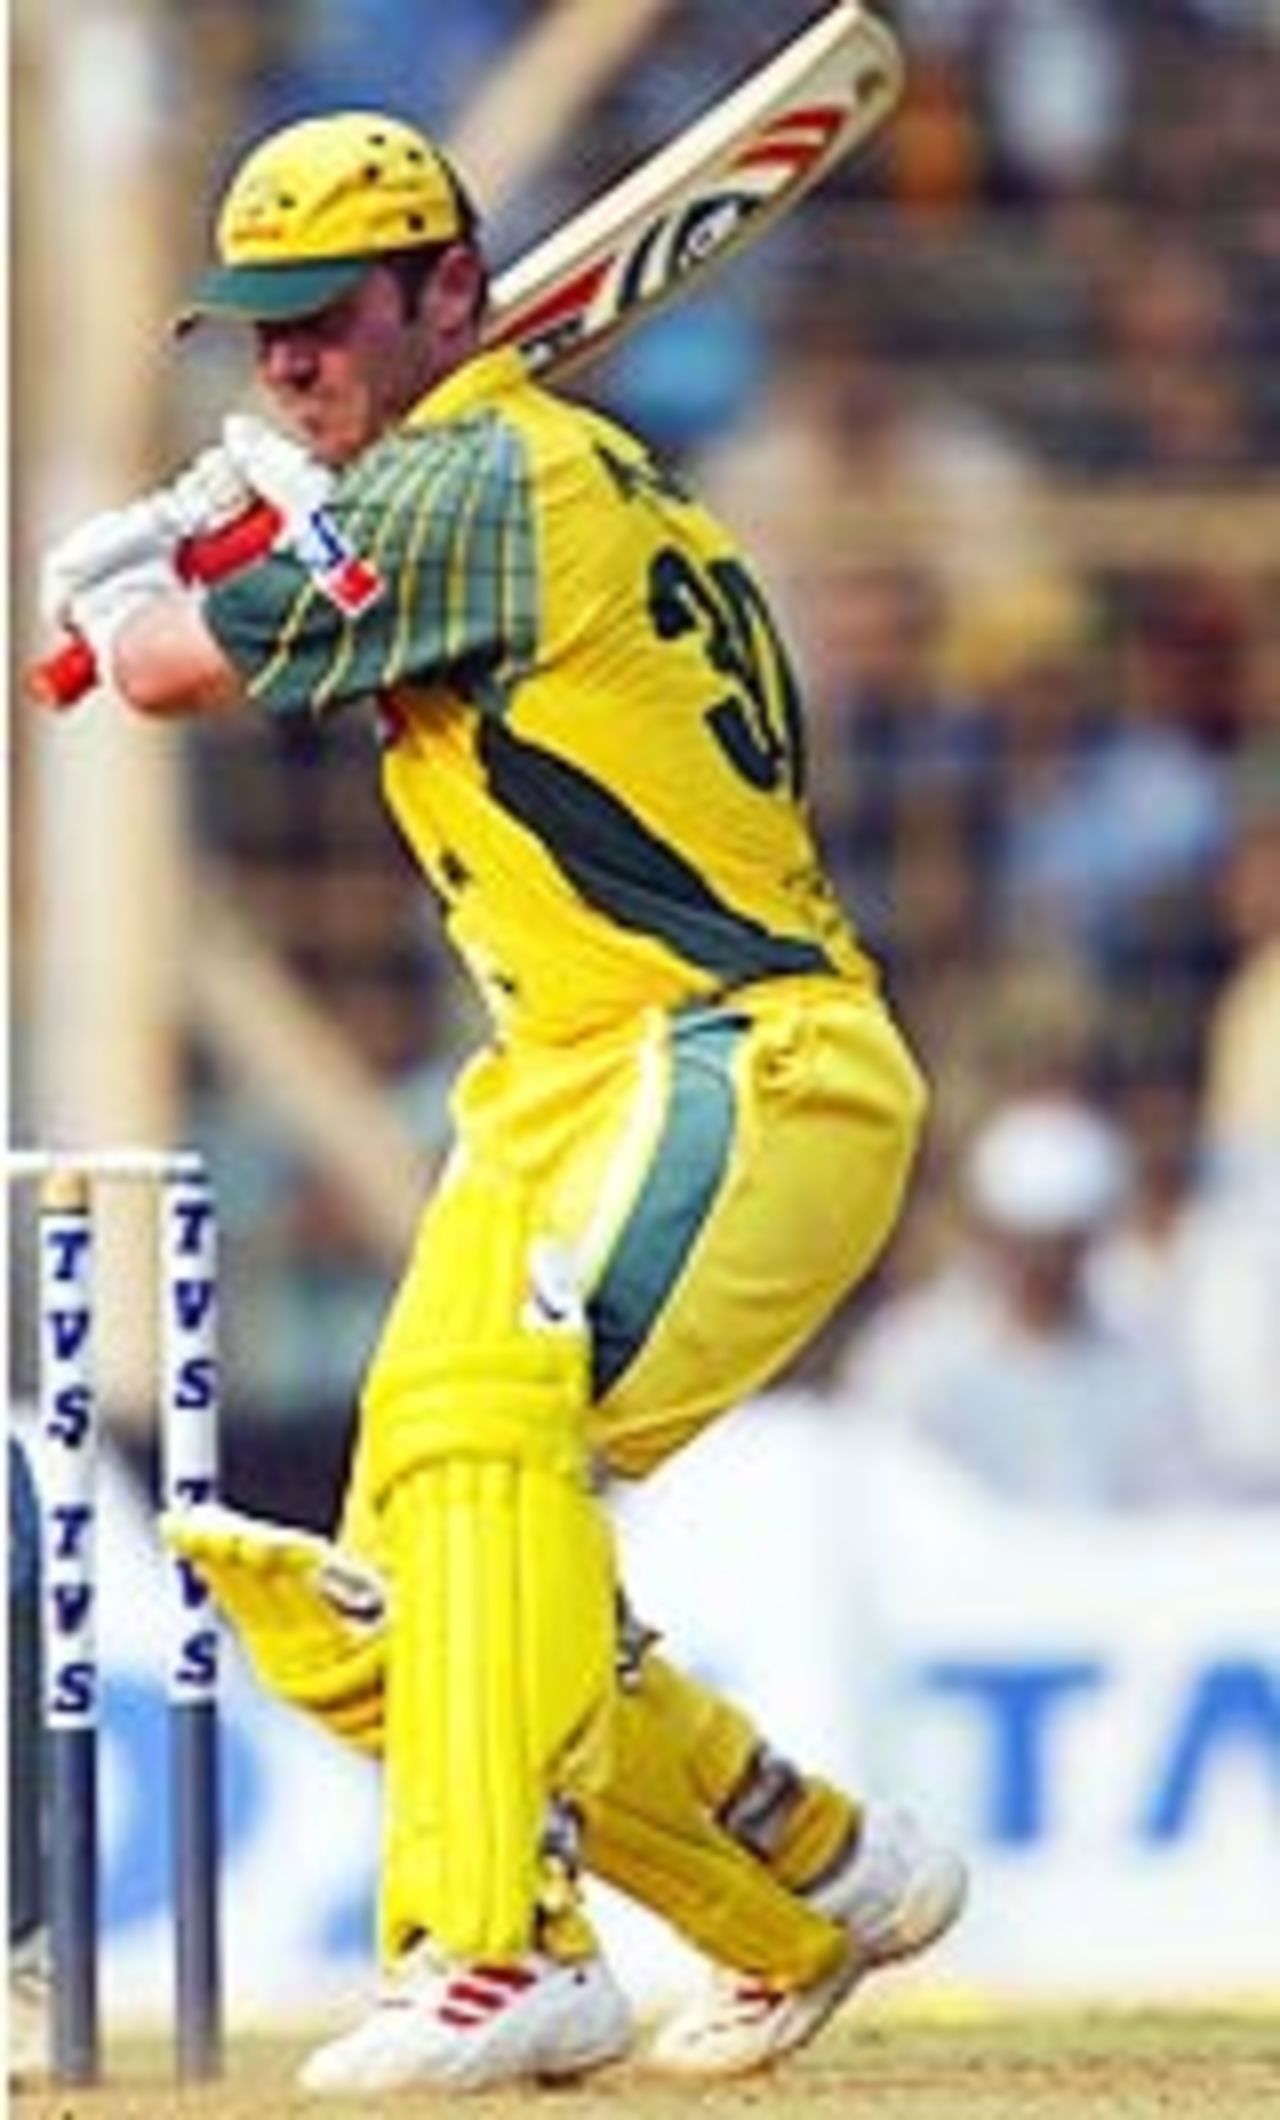 Damien Martyn on his way to a classy hundred, India v Australia, 4th ODI, TVS Cup, November 1, 2003